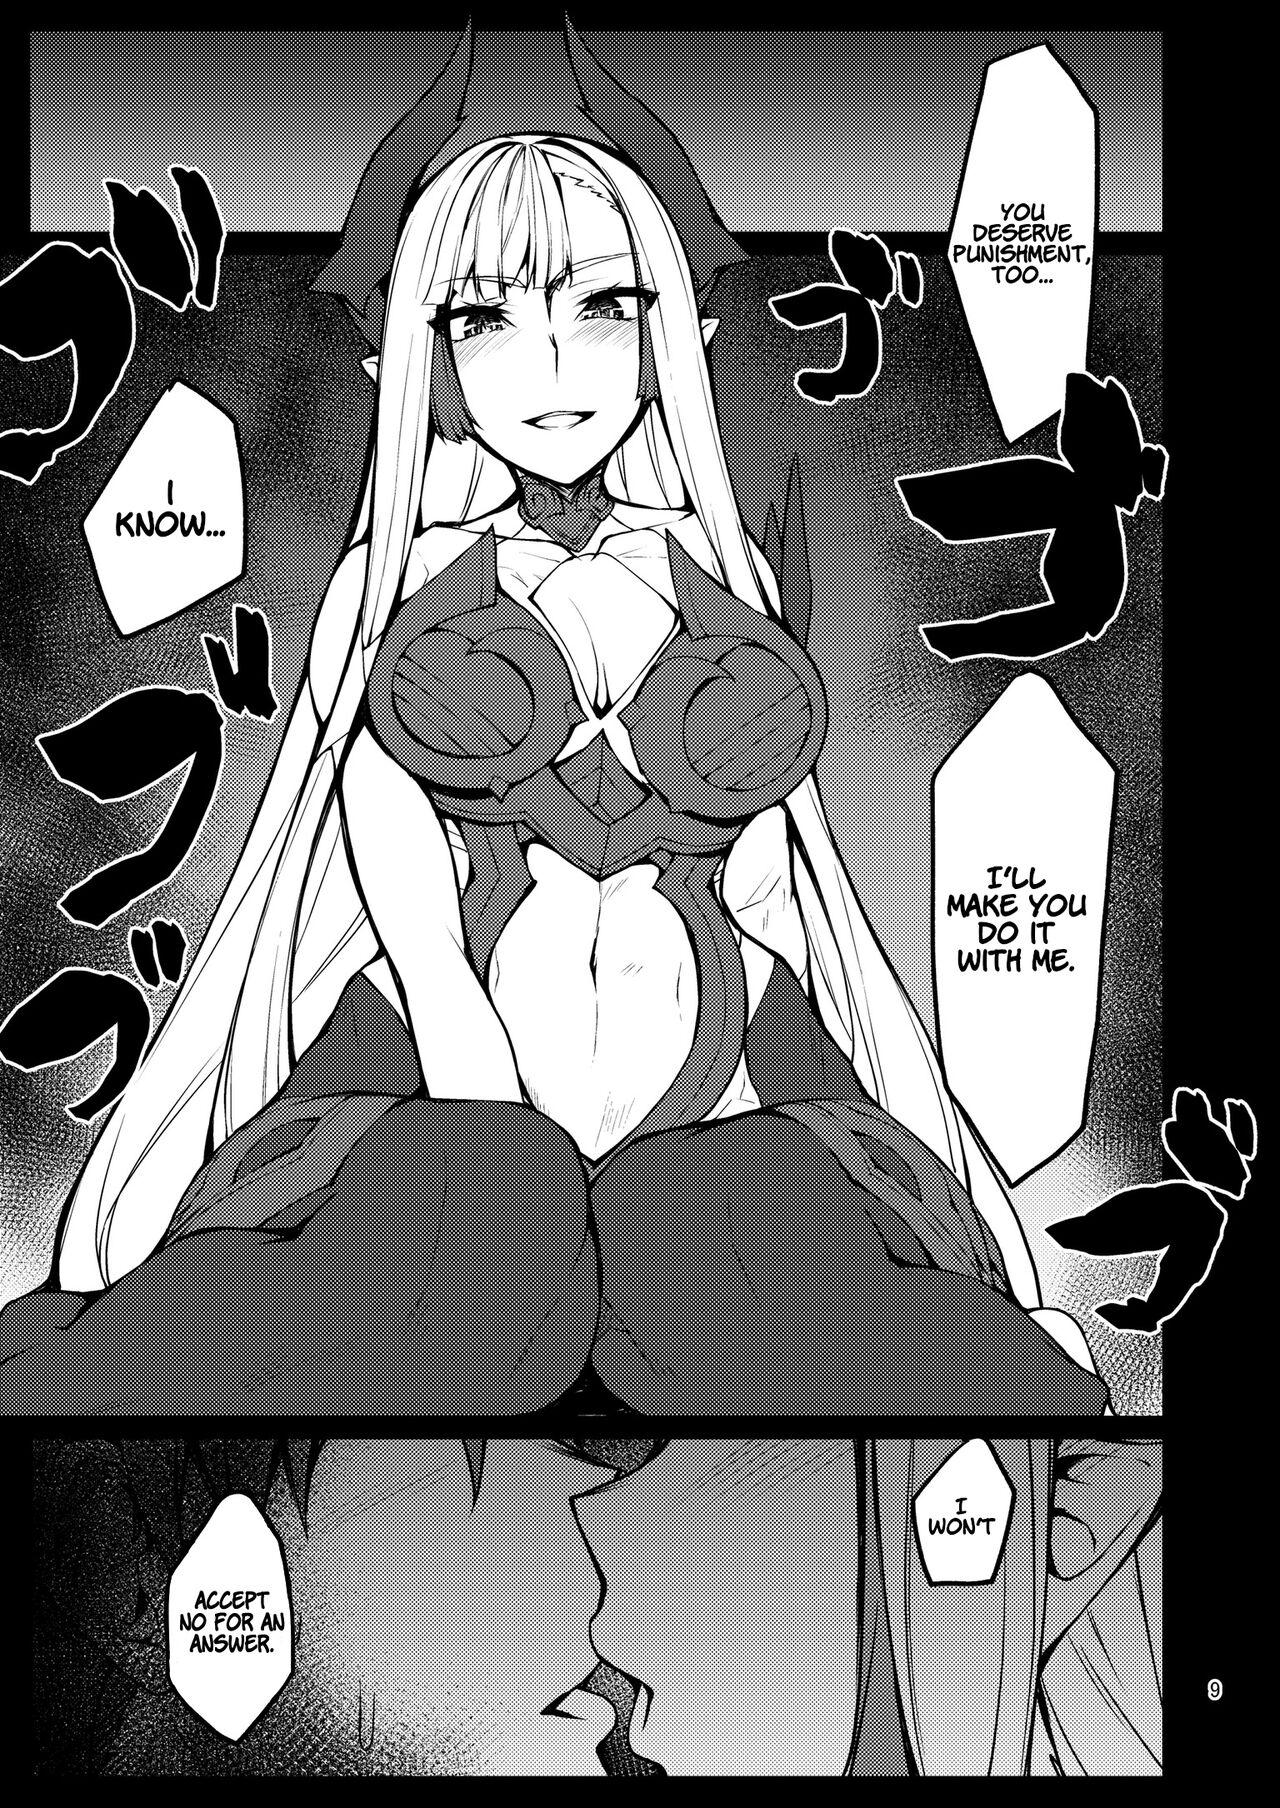 Hoe Kiichi Hougen Book: Mentor - Fate grand order Masterbation - Page 8